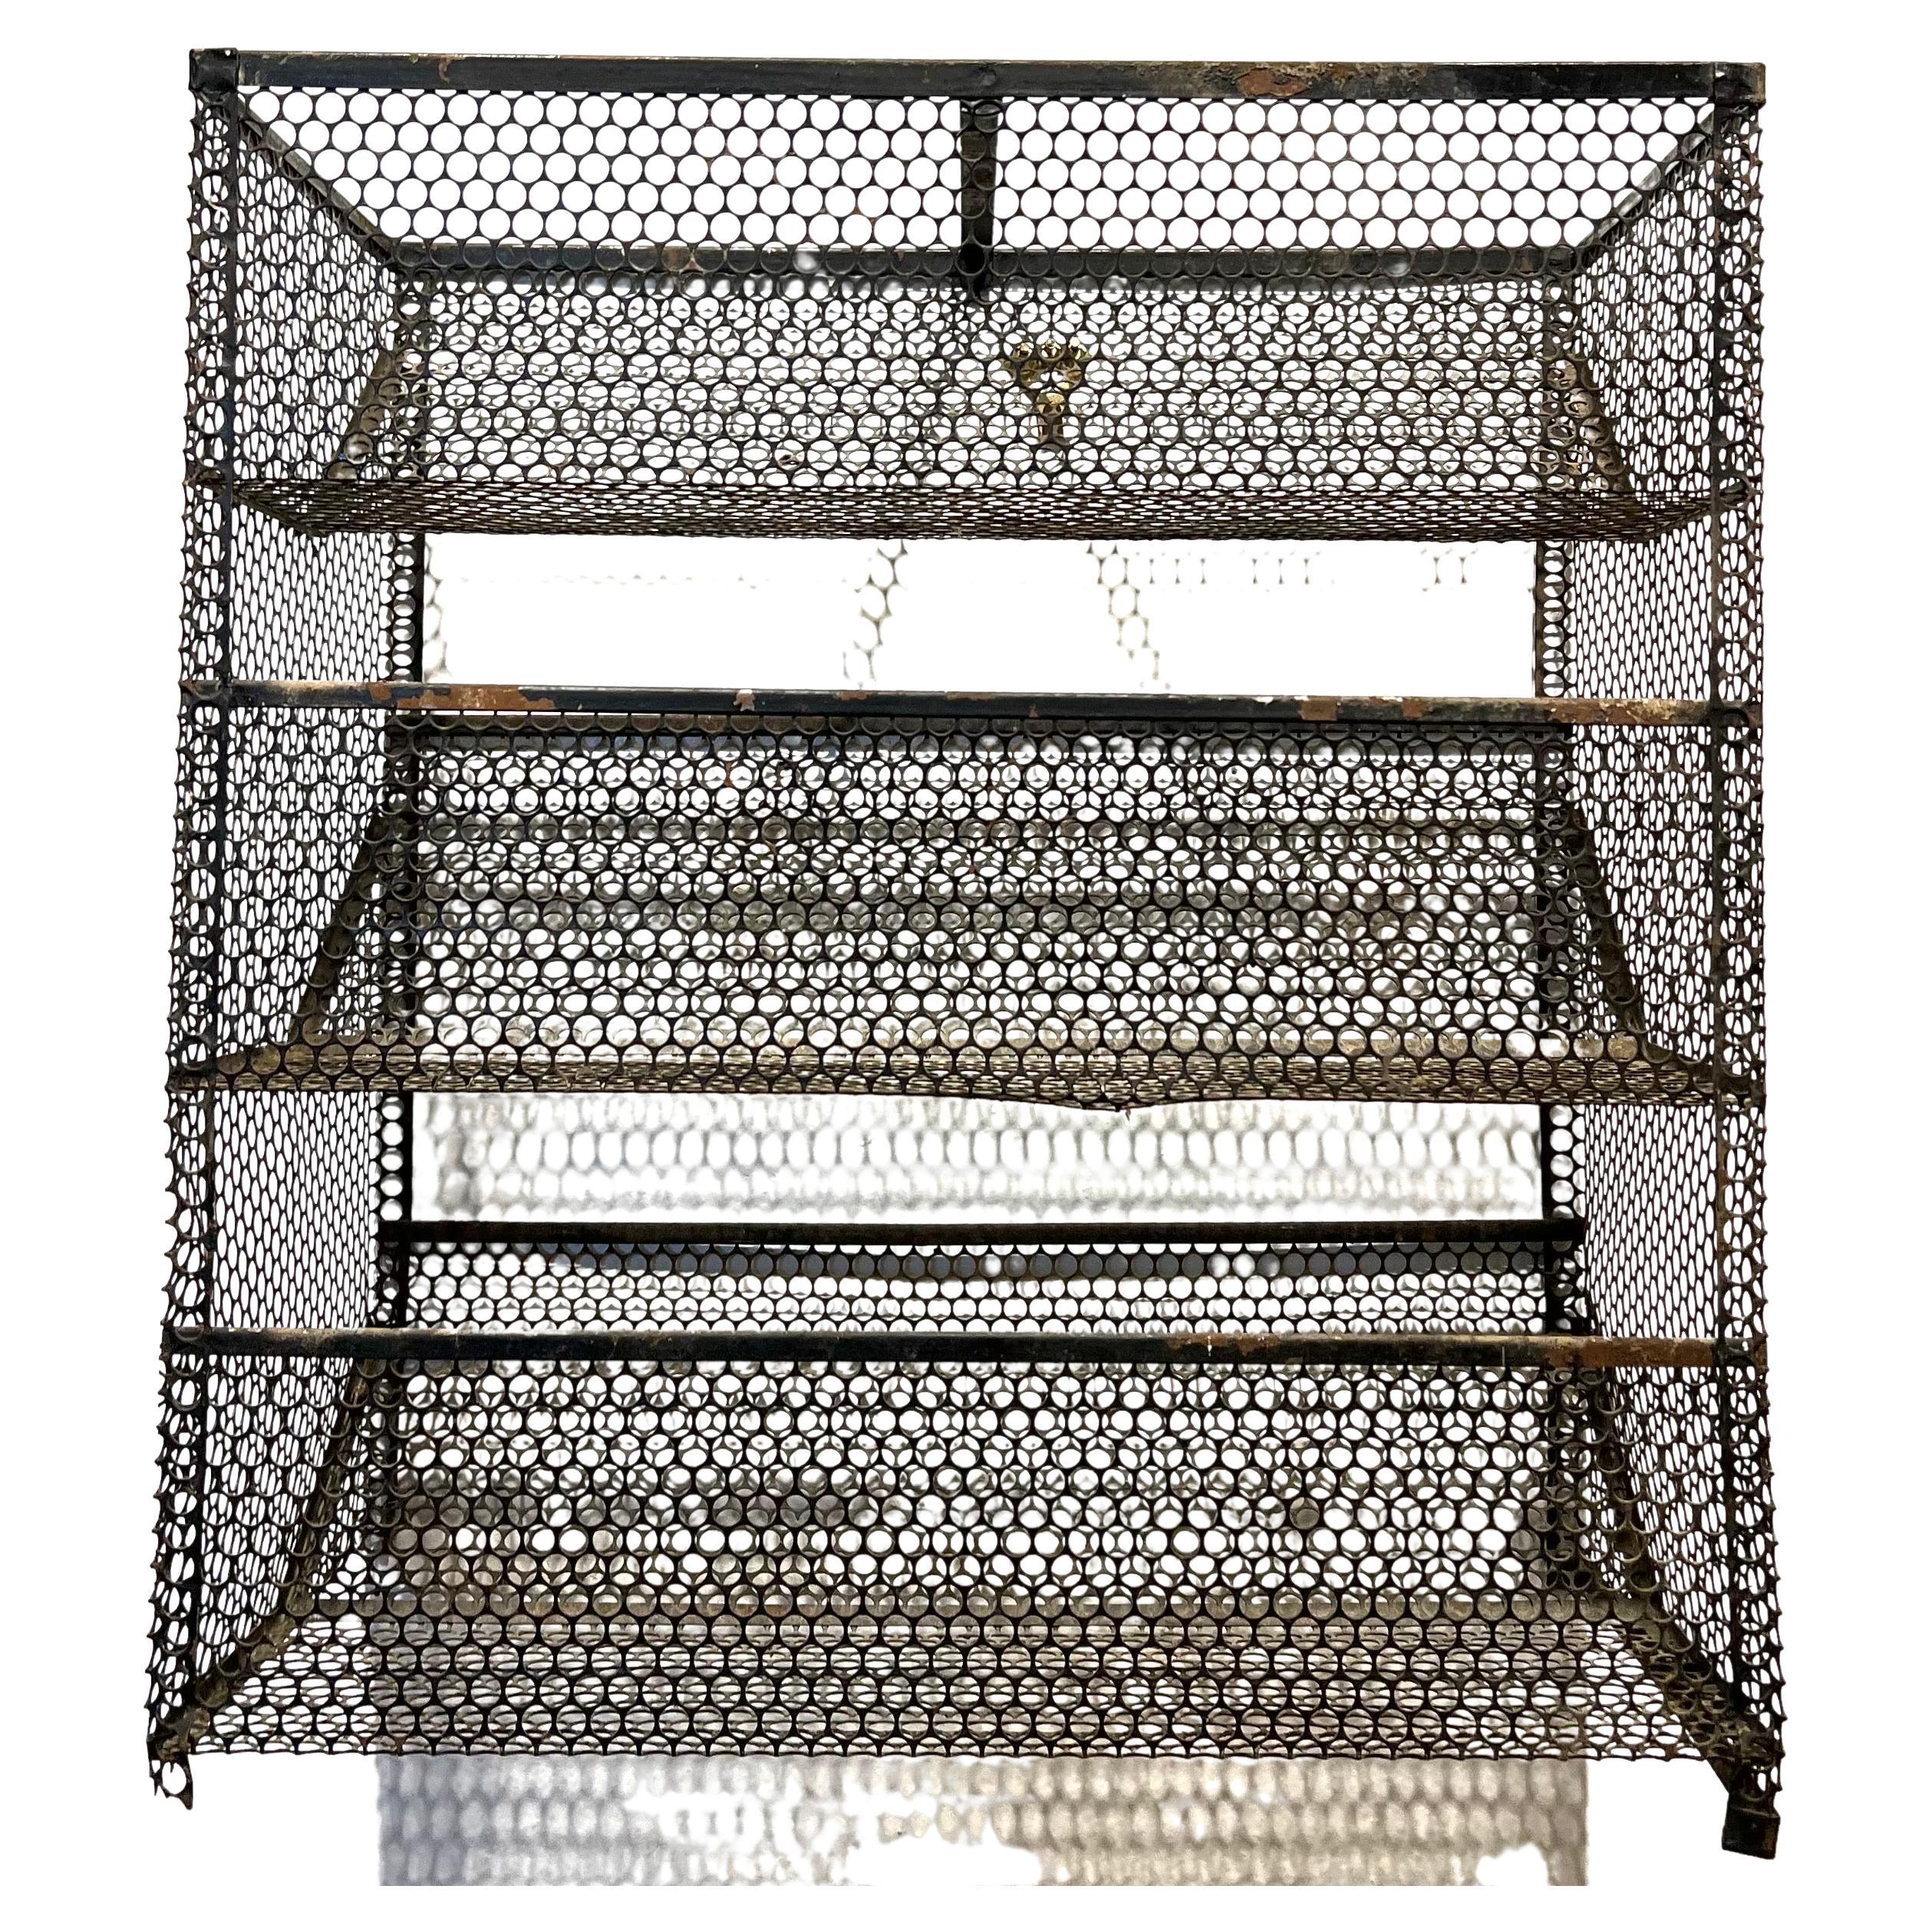 Cool perforated metal caddy, catch it all in original black enameled metal great for display smalls its missing one metal bottom stripe and some light bending and chips on the painting as is the original finish and patina. it can be hung or use on